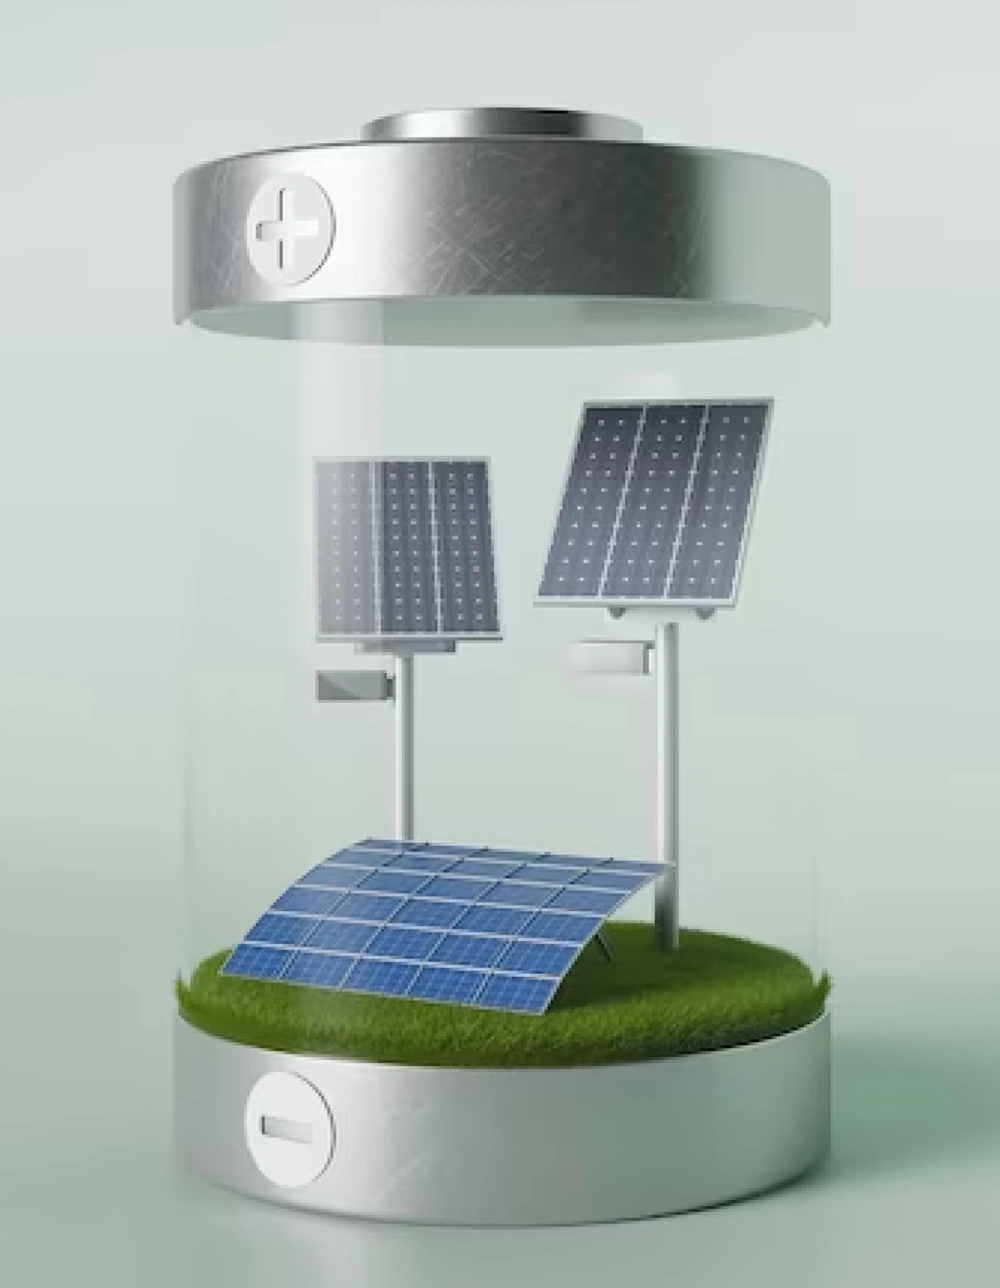 An artistic impression of a solar battery. A translucent battery casing with small solar panels inside.